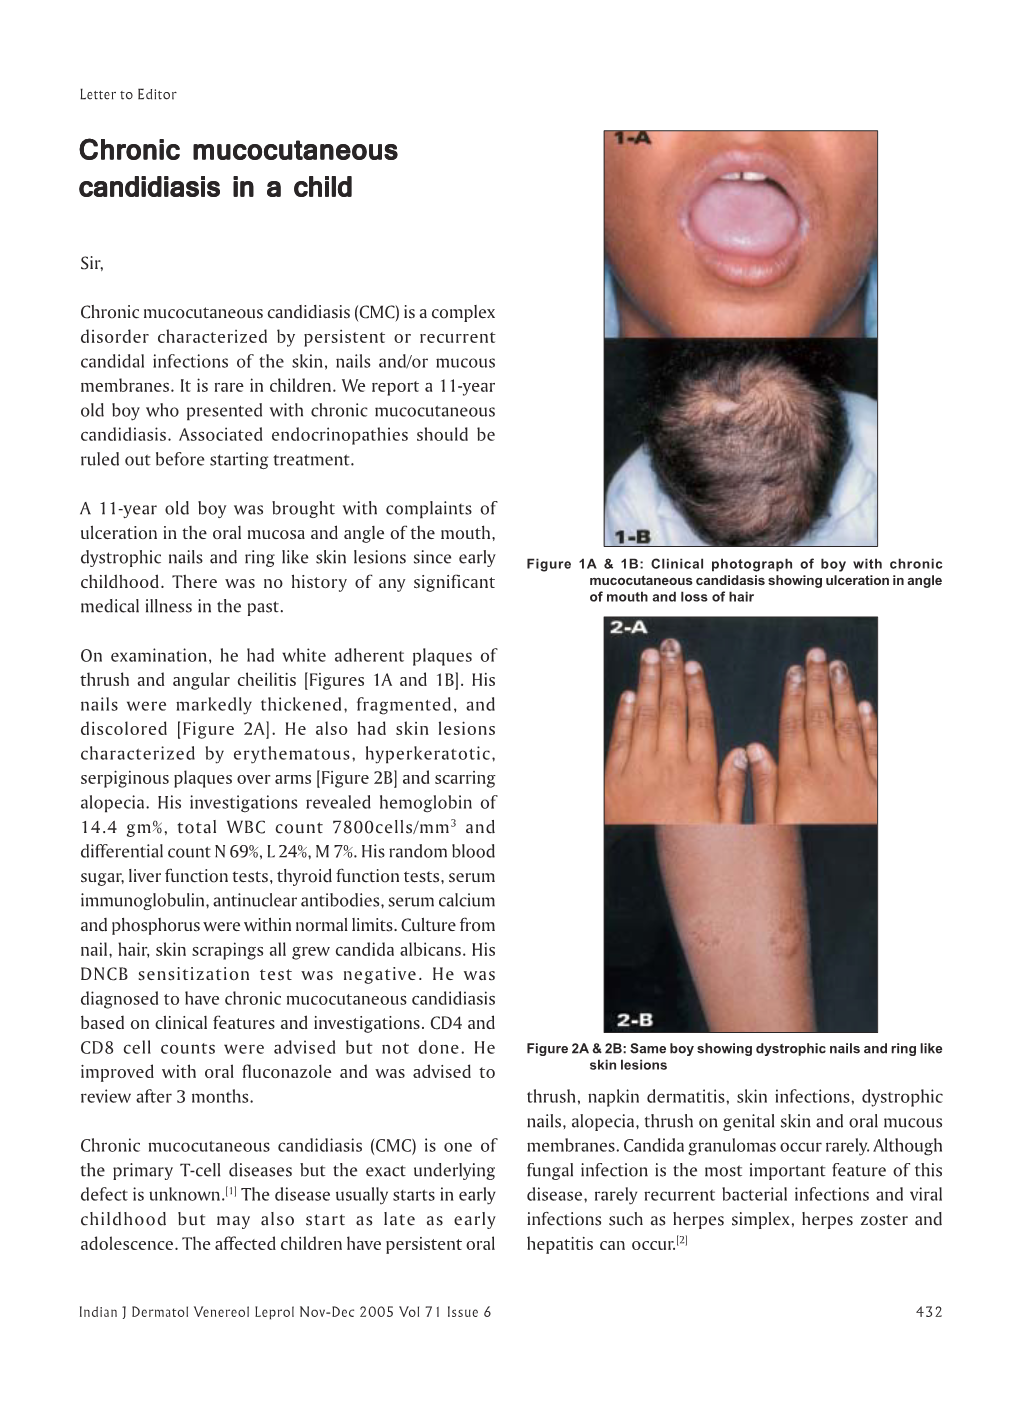 Chronic Mucocutaneous Candidiasis in a Child